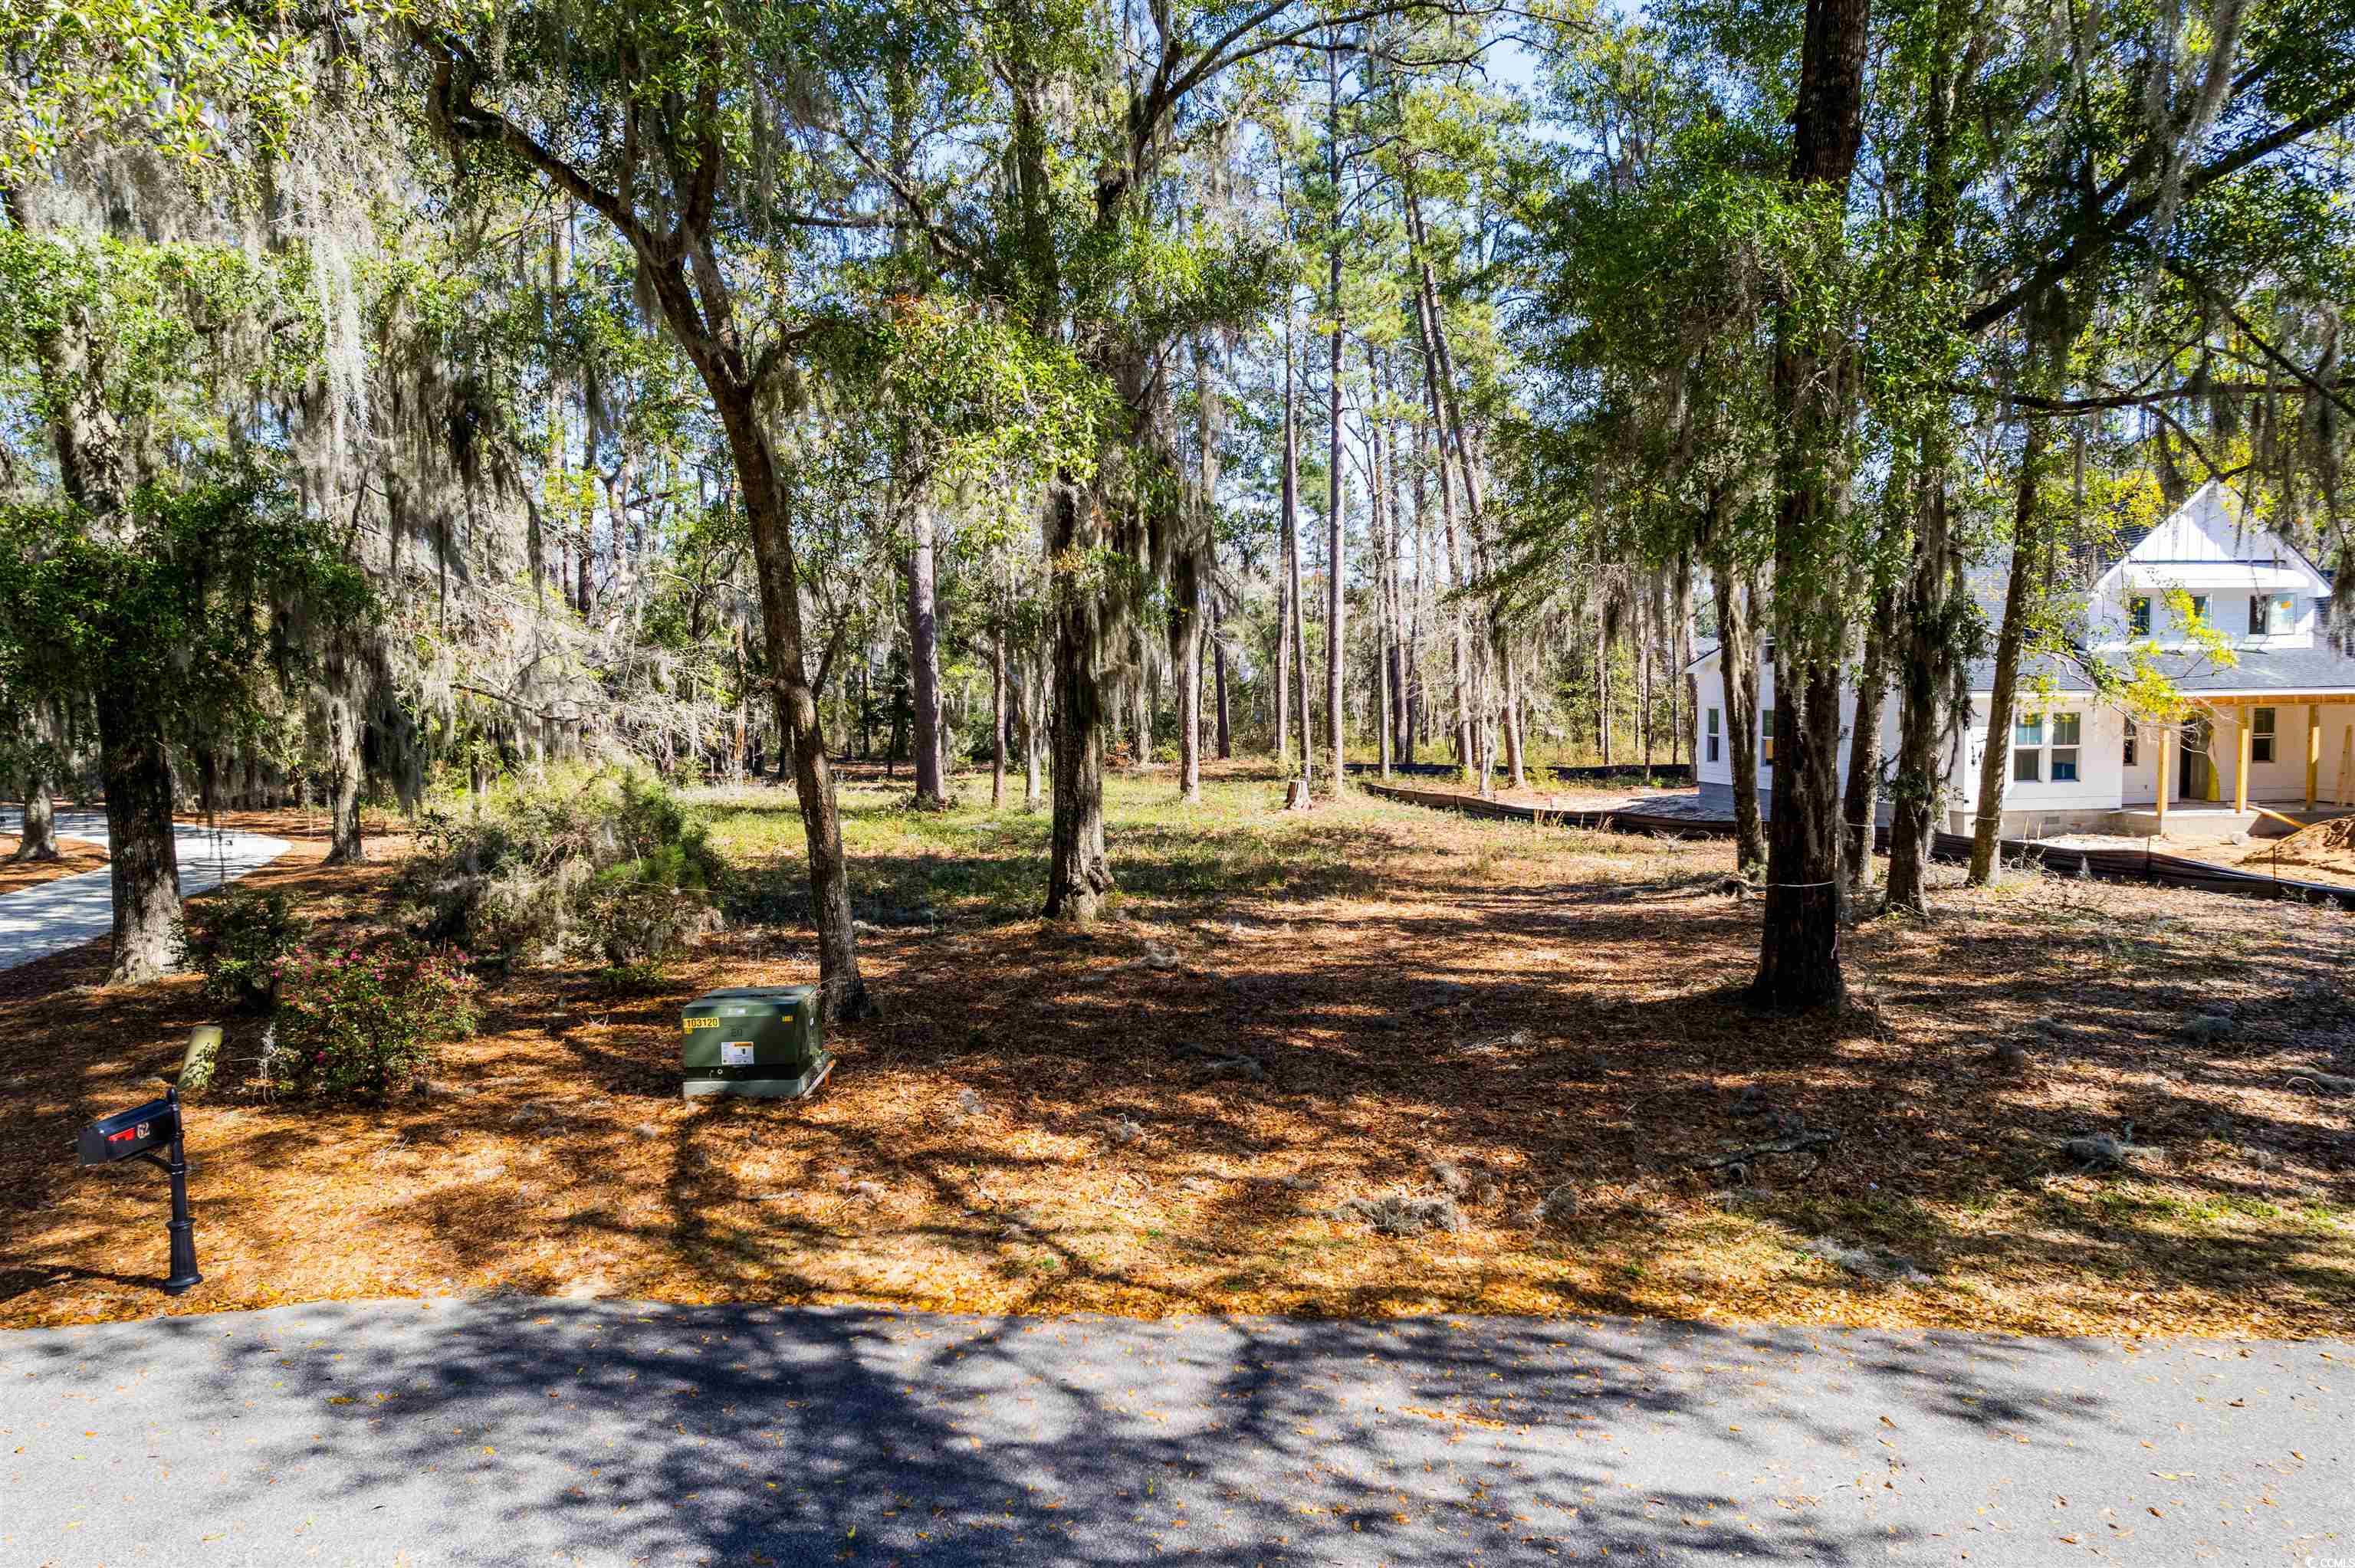 incredible opportunity to own 0.59 acres in the prestigious gated community of litchfield plantation. surrounded by live oak trees and beautiful views of the historic rice fields, this unique lot is located in a cul-de-sac for privacy and added convenience. this lot is walking distance to the community playground and pool that overlooks the rice fields along the waccamaw river. upon entering litchfield plantation you’ll be welcomed by 200+ year live oaks and the historic plantation house dating back to the 1740’s. this community also has a marina with access to the icw/waccamaw river, private ocean front beach house with private parking on pawleys island . located near award wining restaurants, golf courses, fine shopping and just 60 miles north of historic charleston sc. recent survey available upon request. owner is licensed sc realtor.